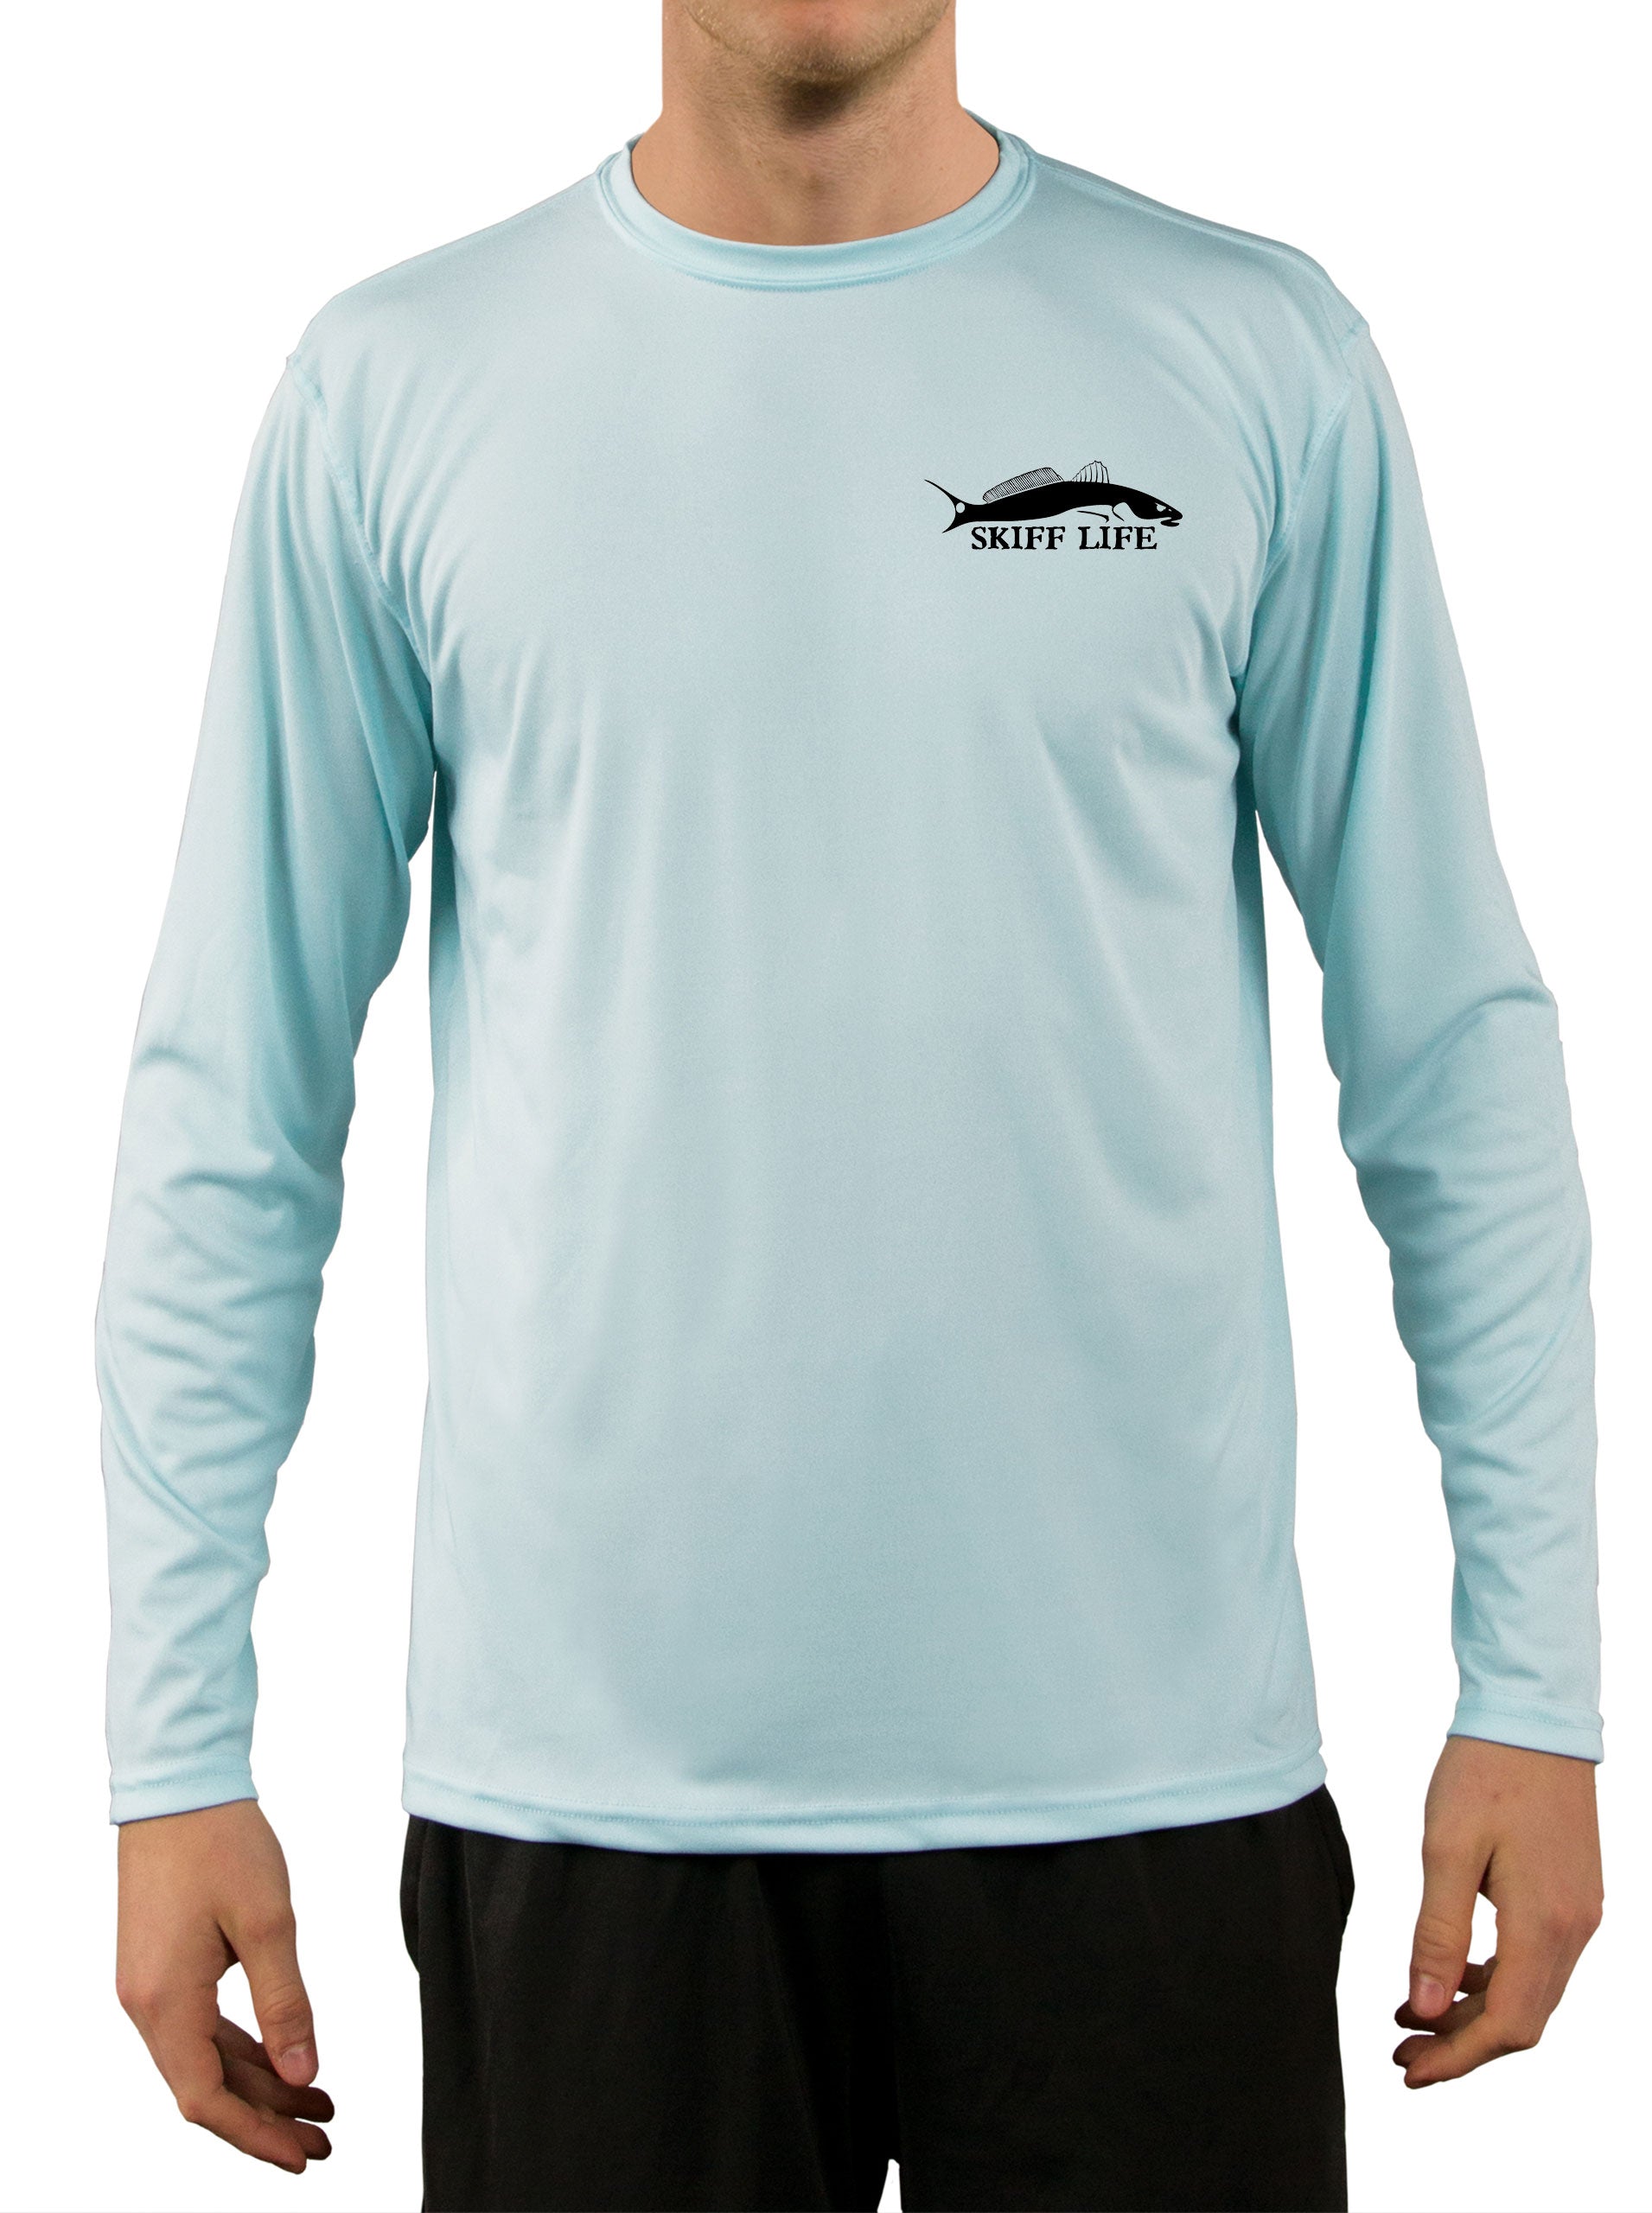 Big and Tall Mens Clothing - UV Protected Fishing T Shirt +50 Sun Protection with Moisture Wicking Technology - Up to 4XL 4XL / Ice Blue